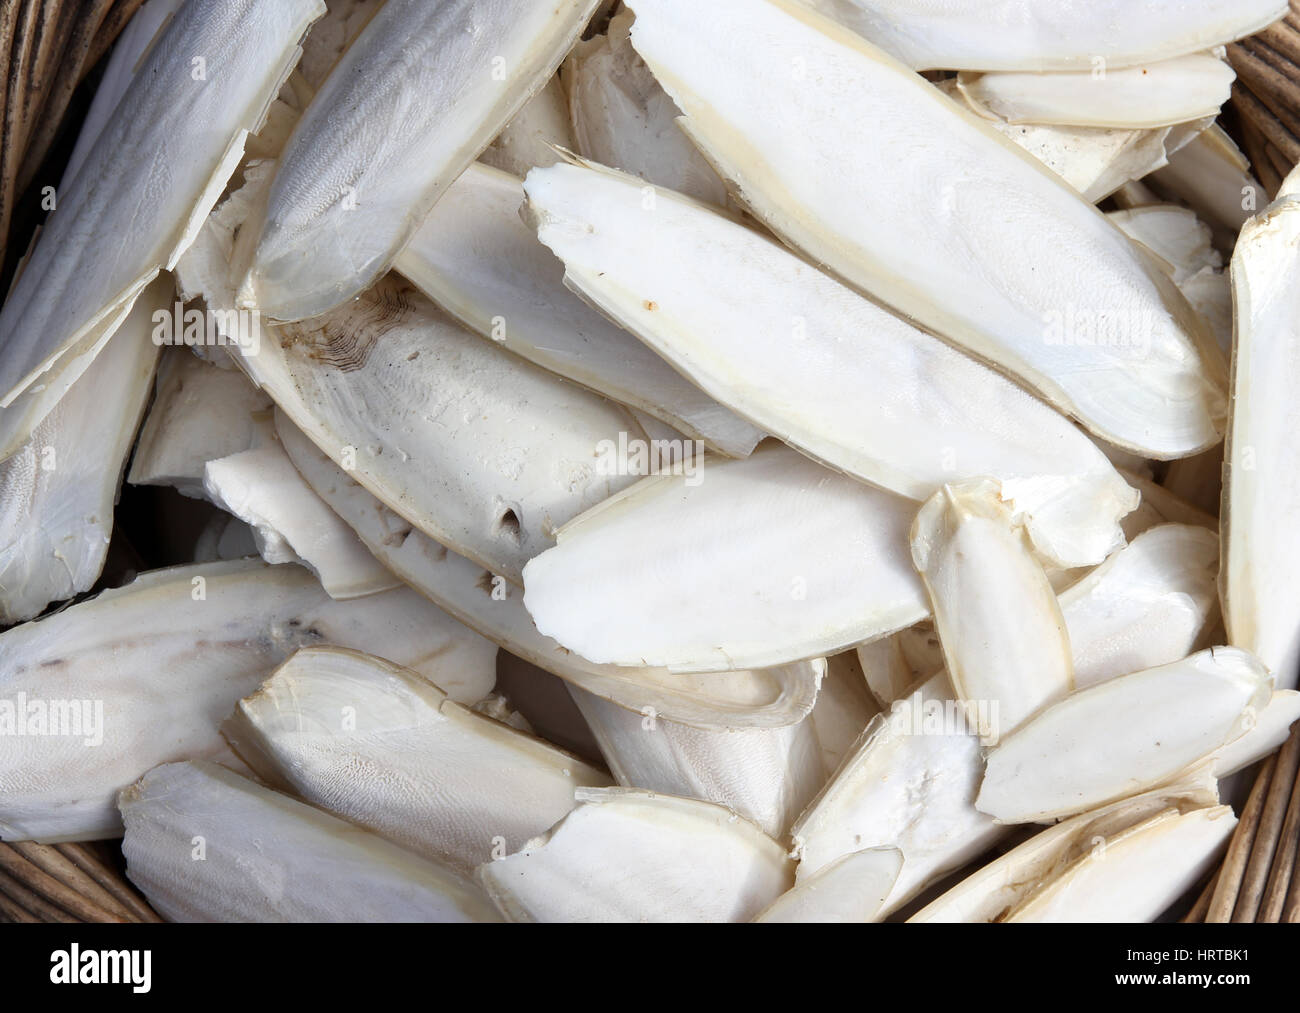 cuttlebone collection of cuttlefish Stock Photo